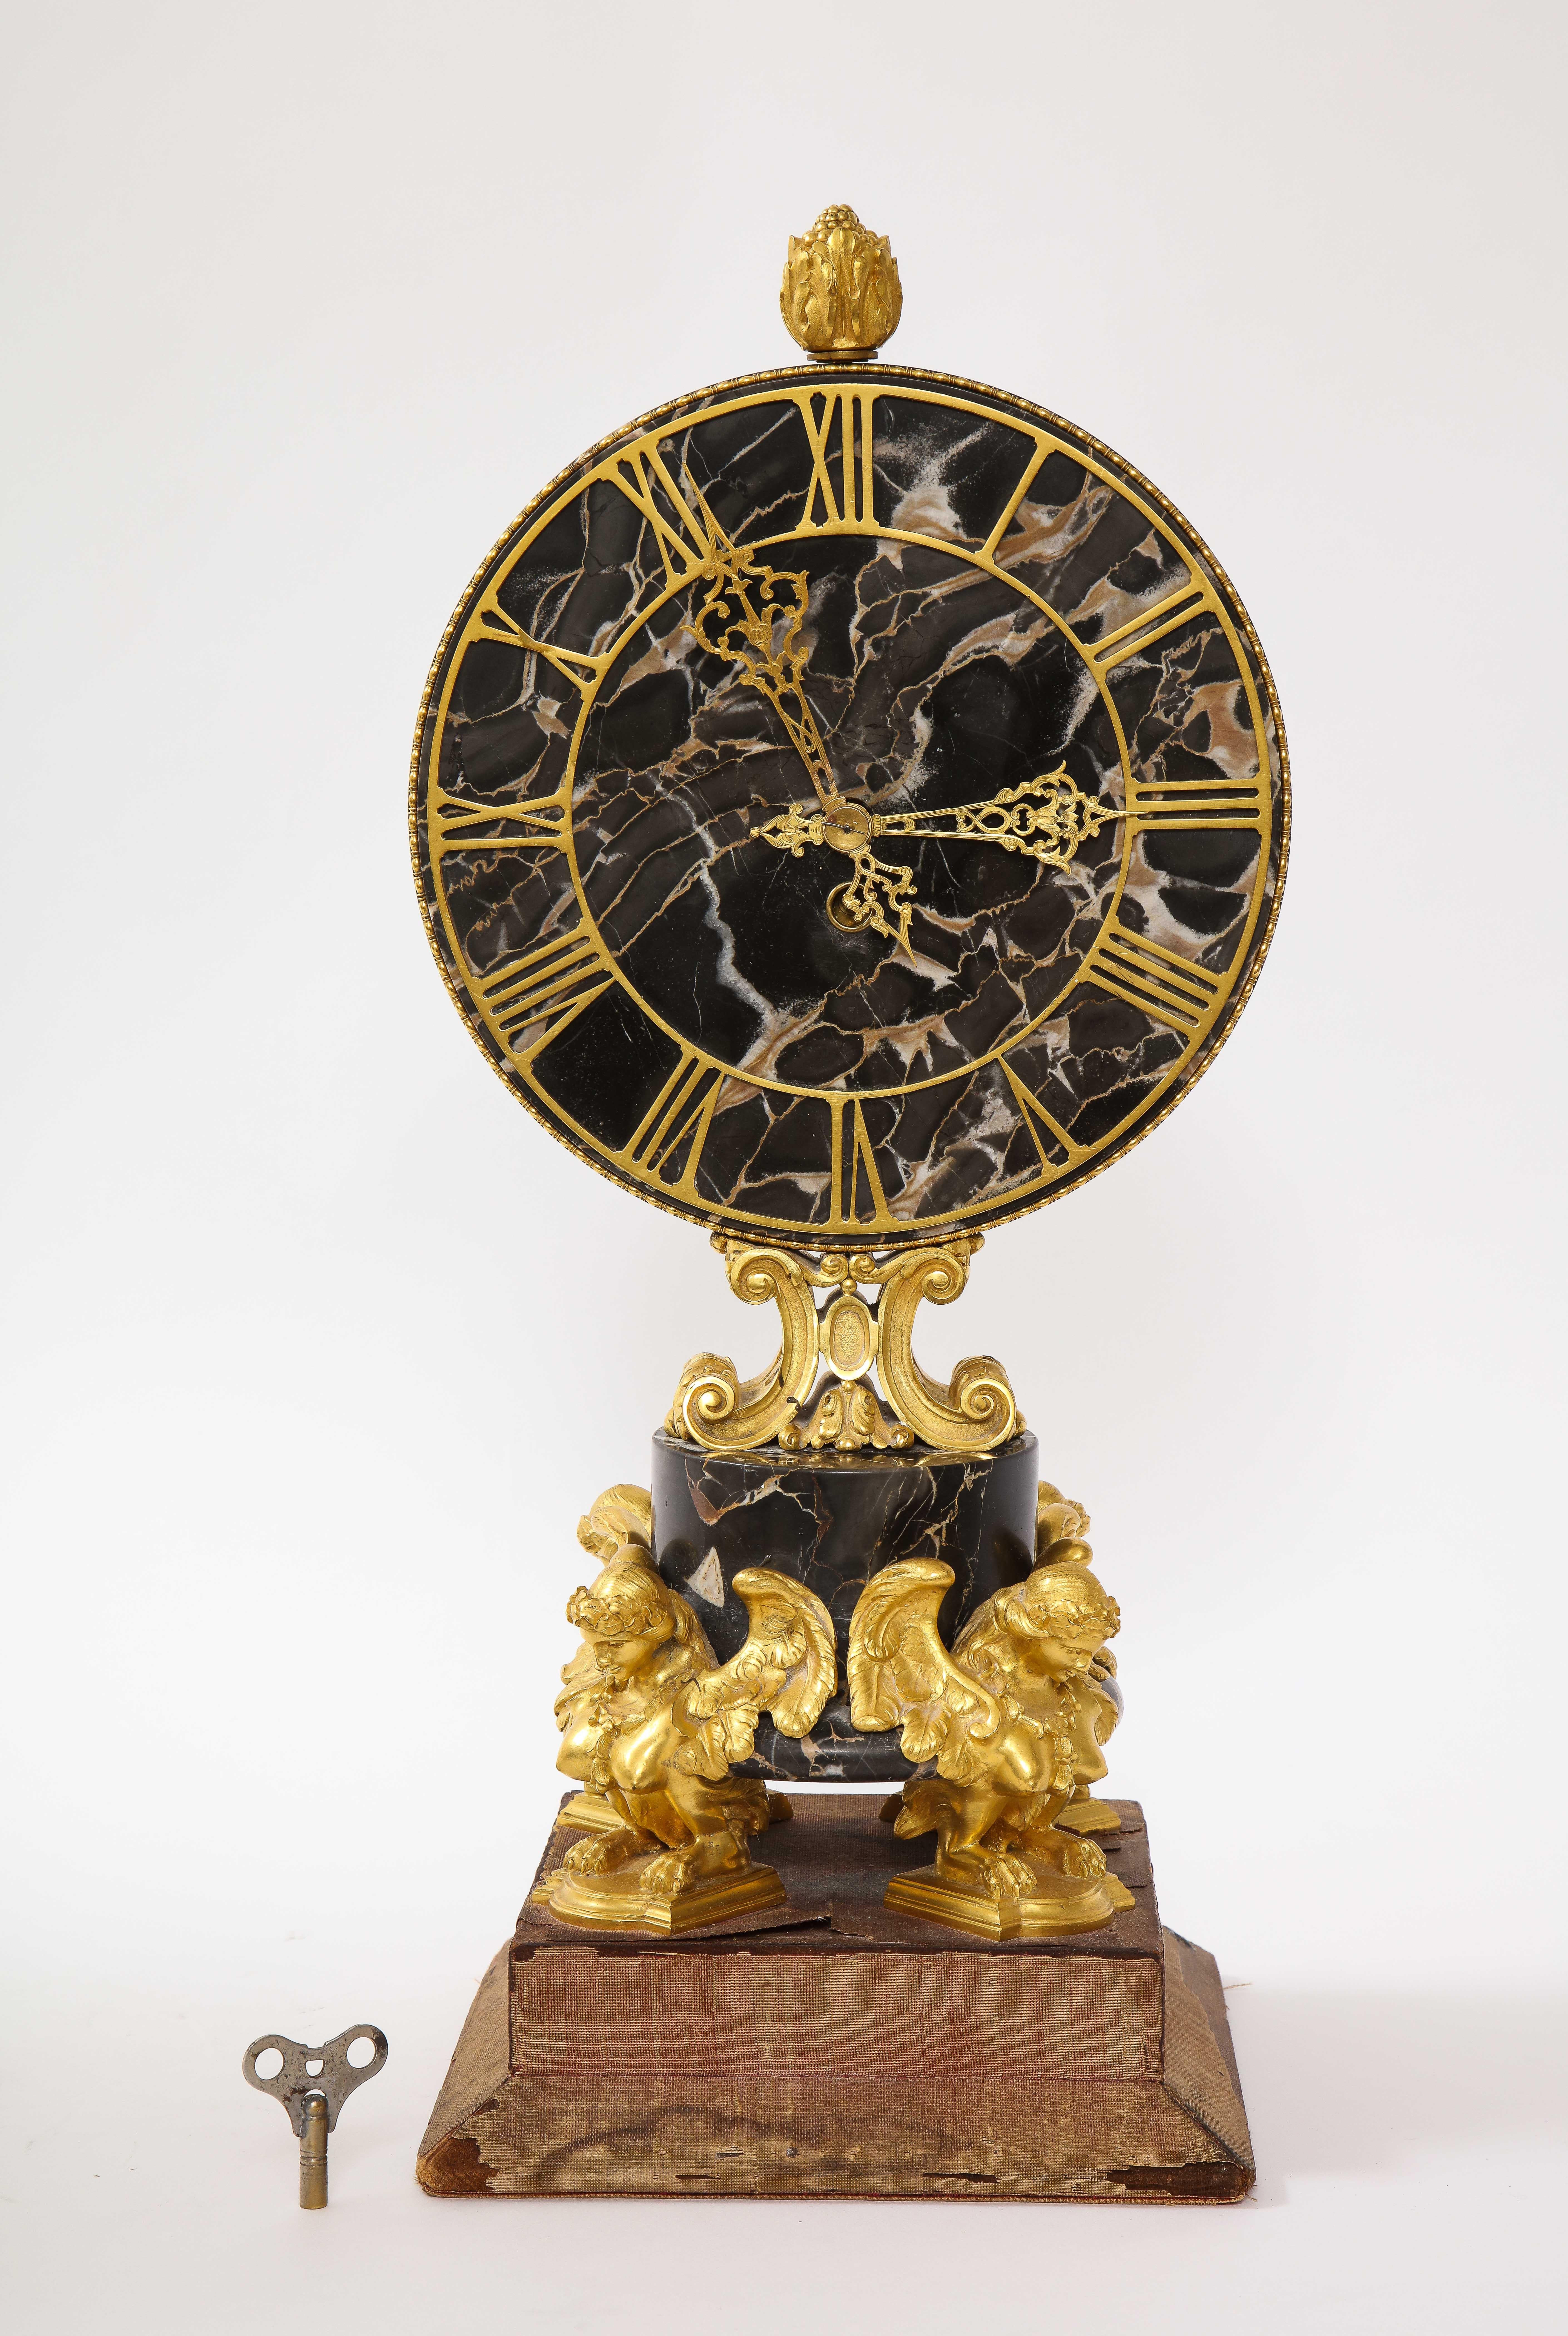 A gorgeous and large E.F. Caldwell black veined marble and dore bronze mounted sphinx legged clock. This is a beautiful mantle clock designed by the great, E.F. Caldwell and Co. The face and mid-section are made of a beautiful hand carved veined